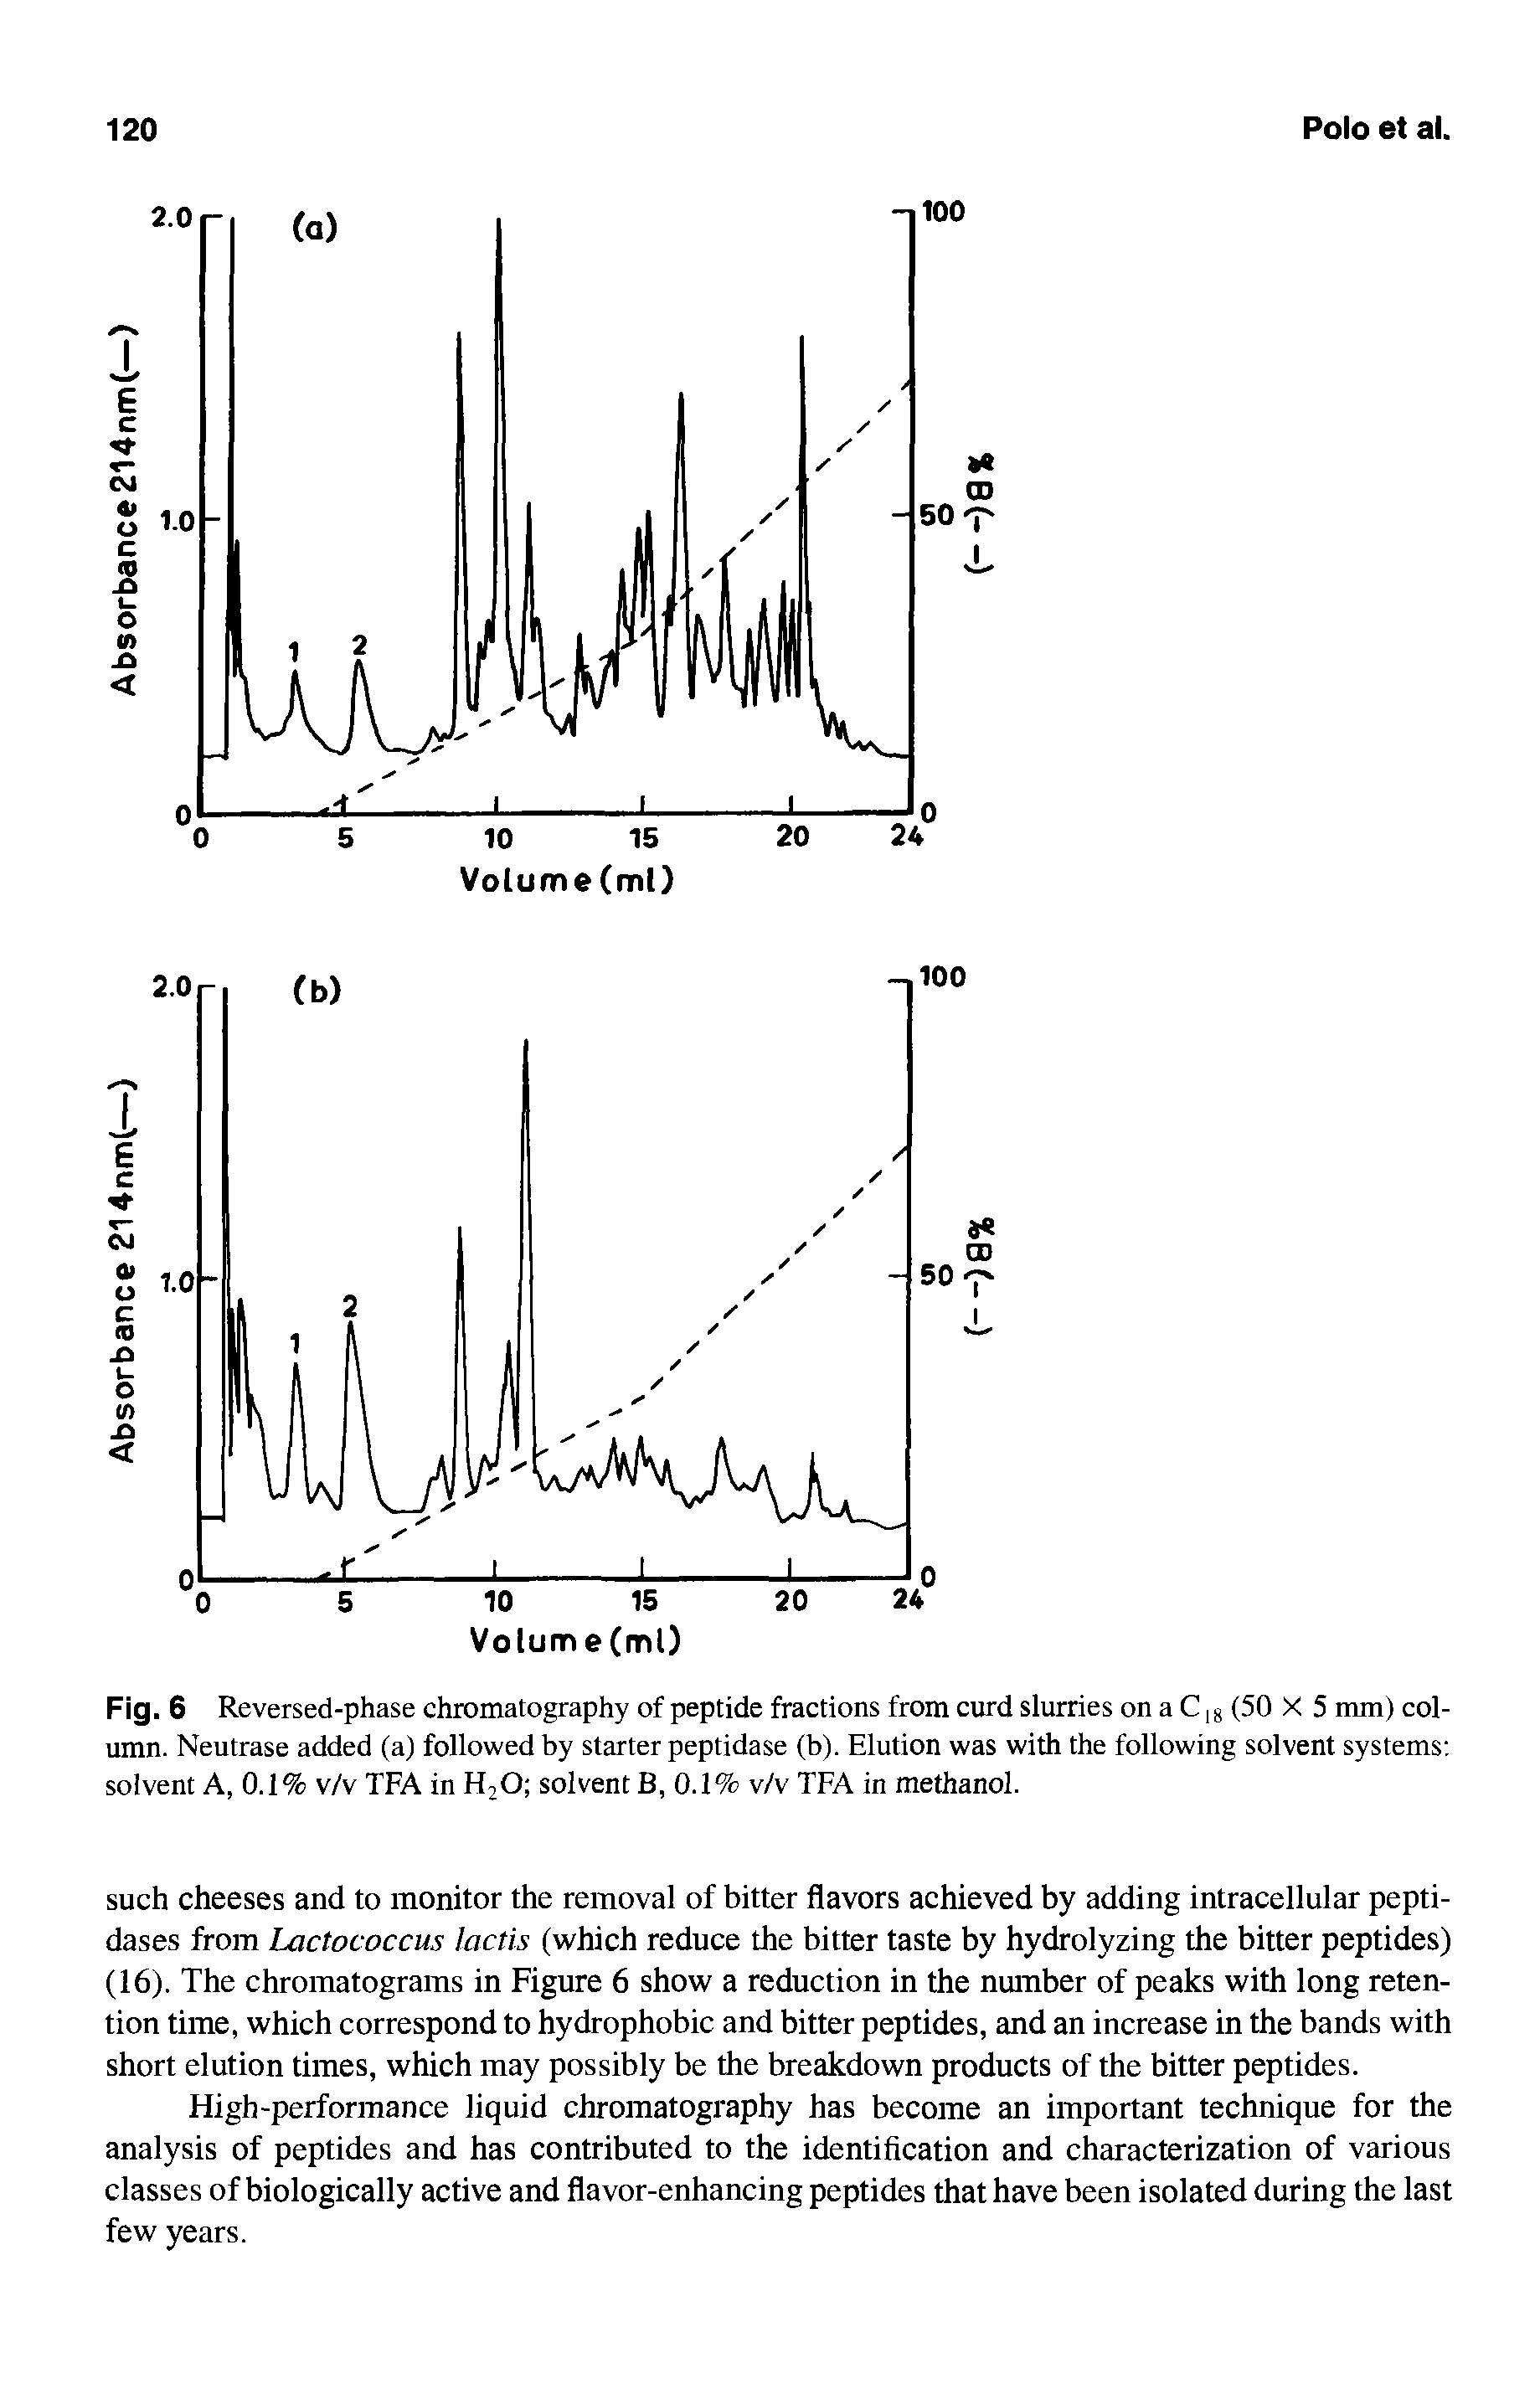 Fig. 6 Reversed-phase chromatography of peptide fractions from curd slurries on a C, 8 (50 X 5 mm) column. Neutrase added (a) followed by starter peptidase (b). Elution was with the following solvent systems solvent A, 0.1% v/v TFA in H20 solvent B, 0.1% v/v TFA in methanol.